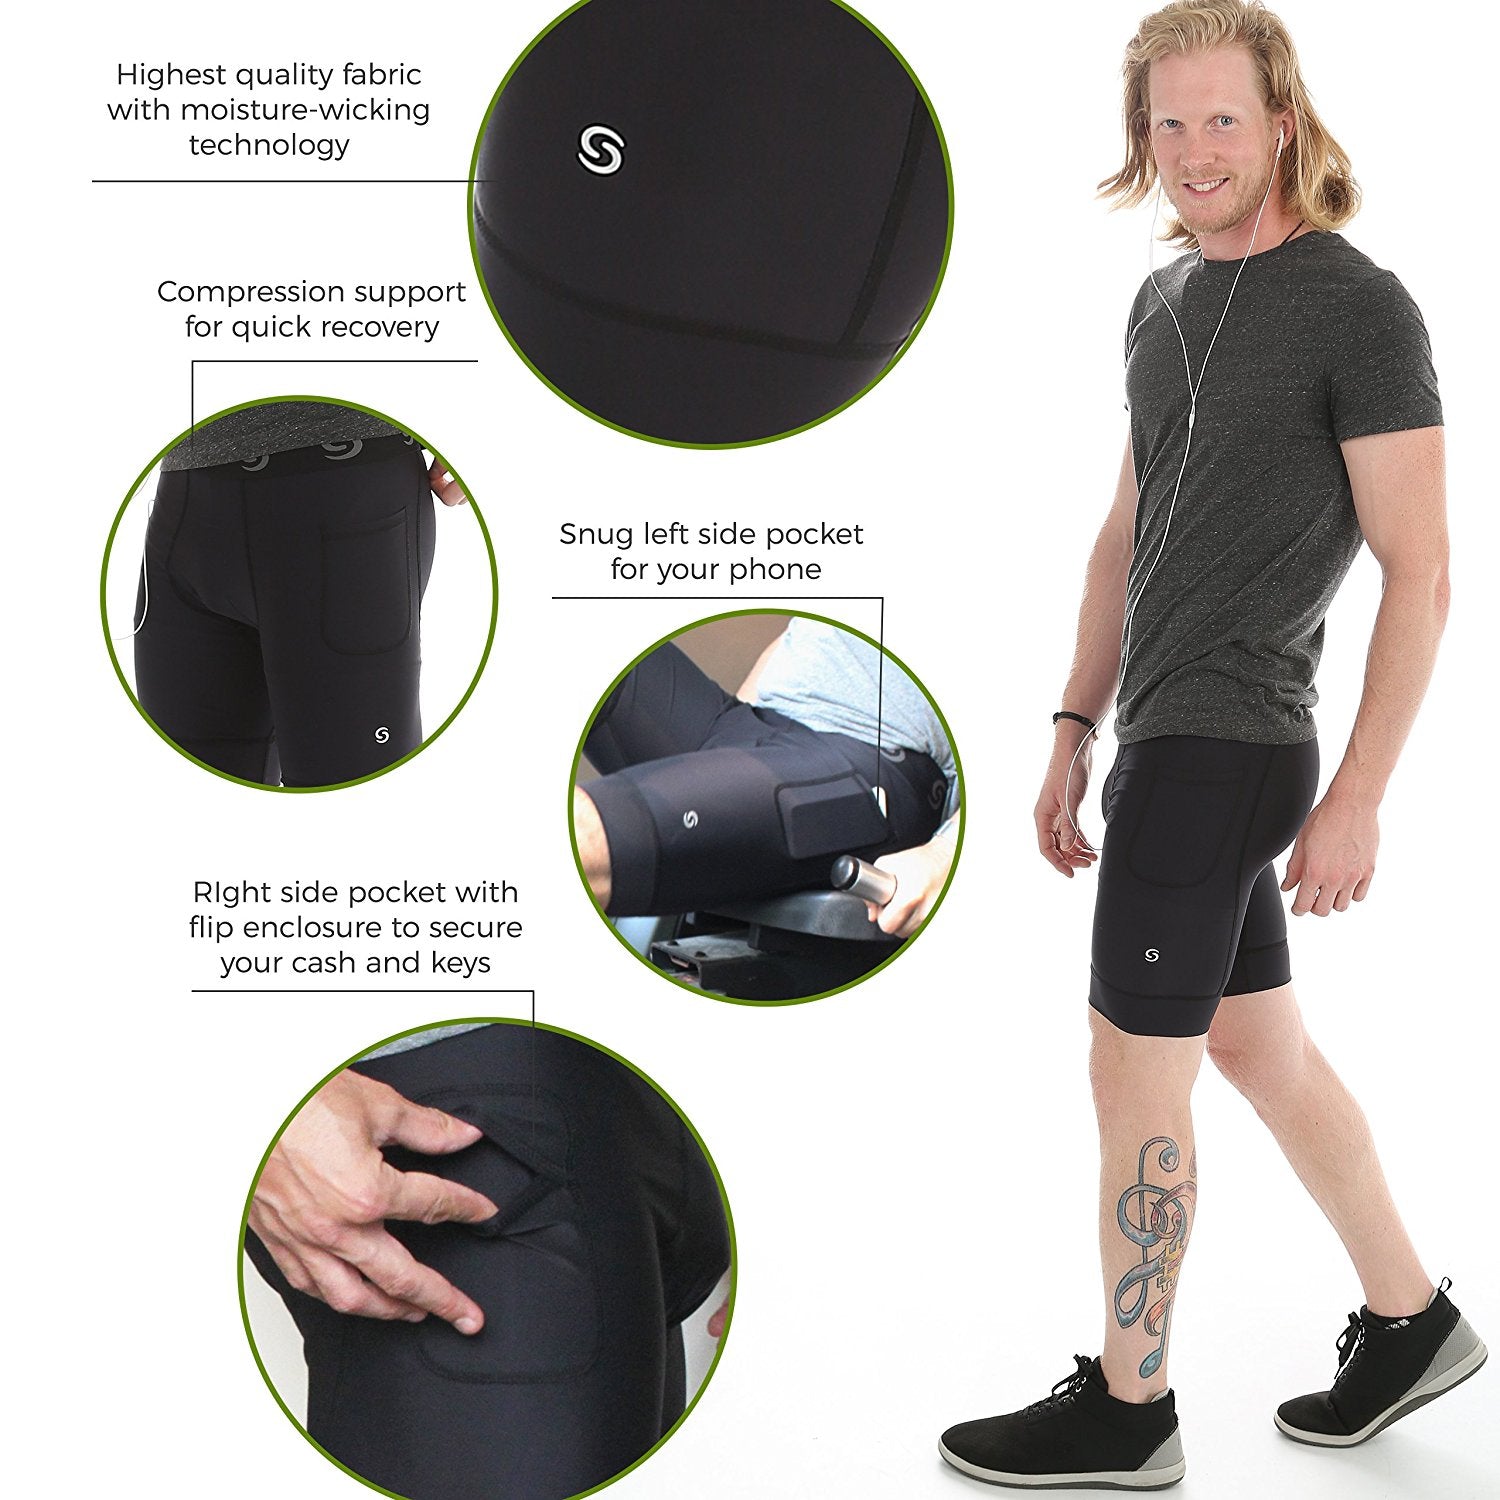 MEN'S COMPRESSION SHORTS with Side Pockets